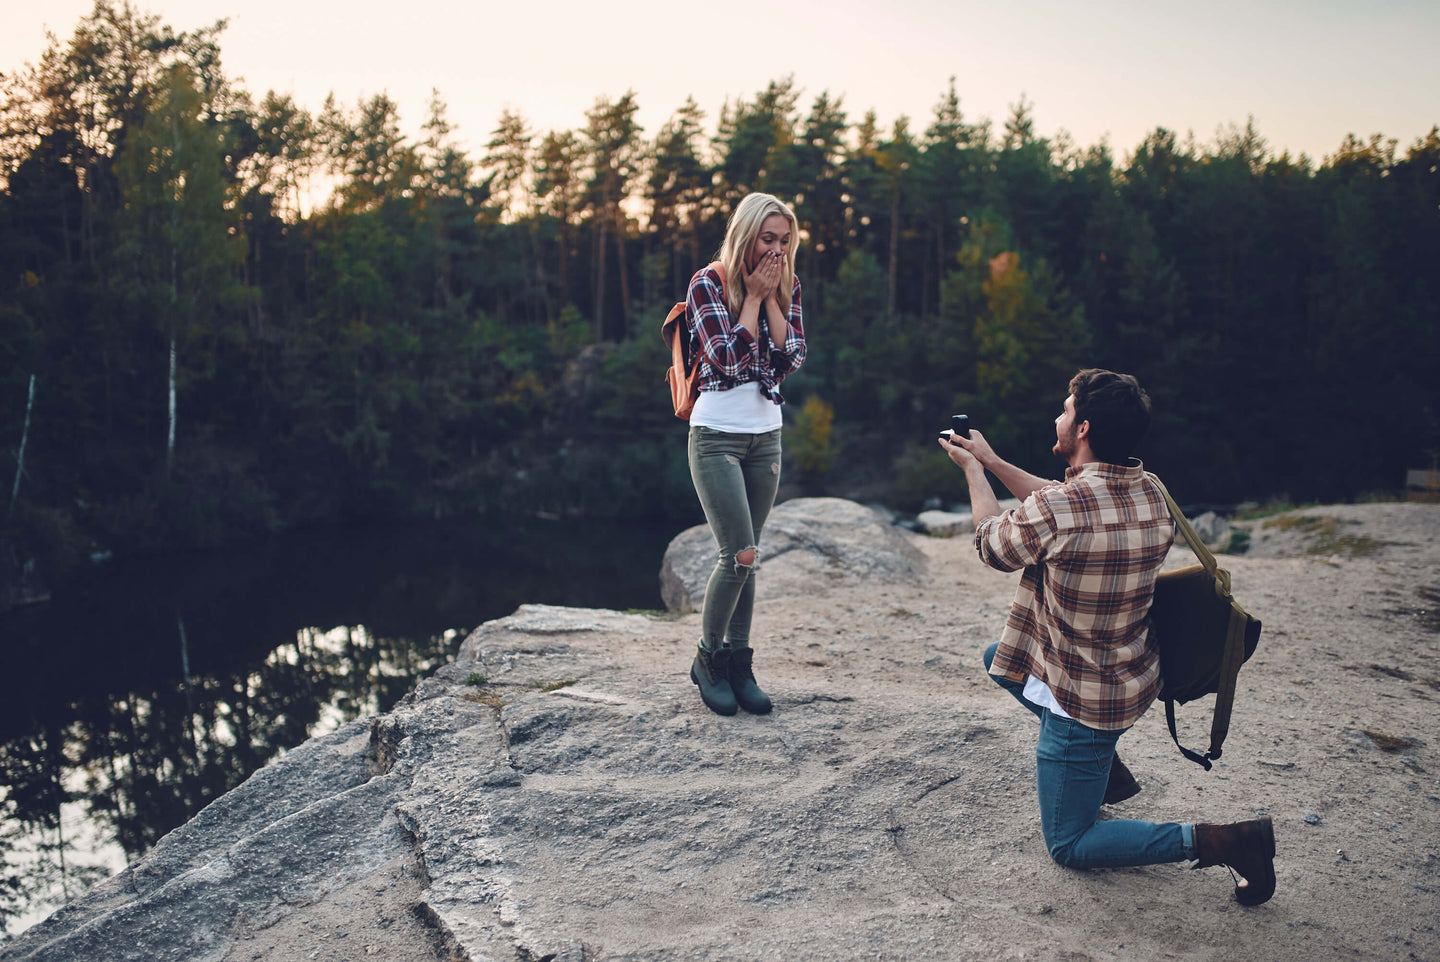 Looking to make an epic proposal?